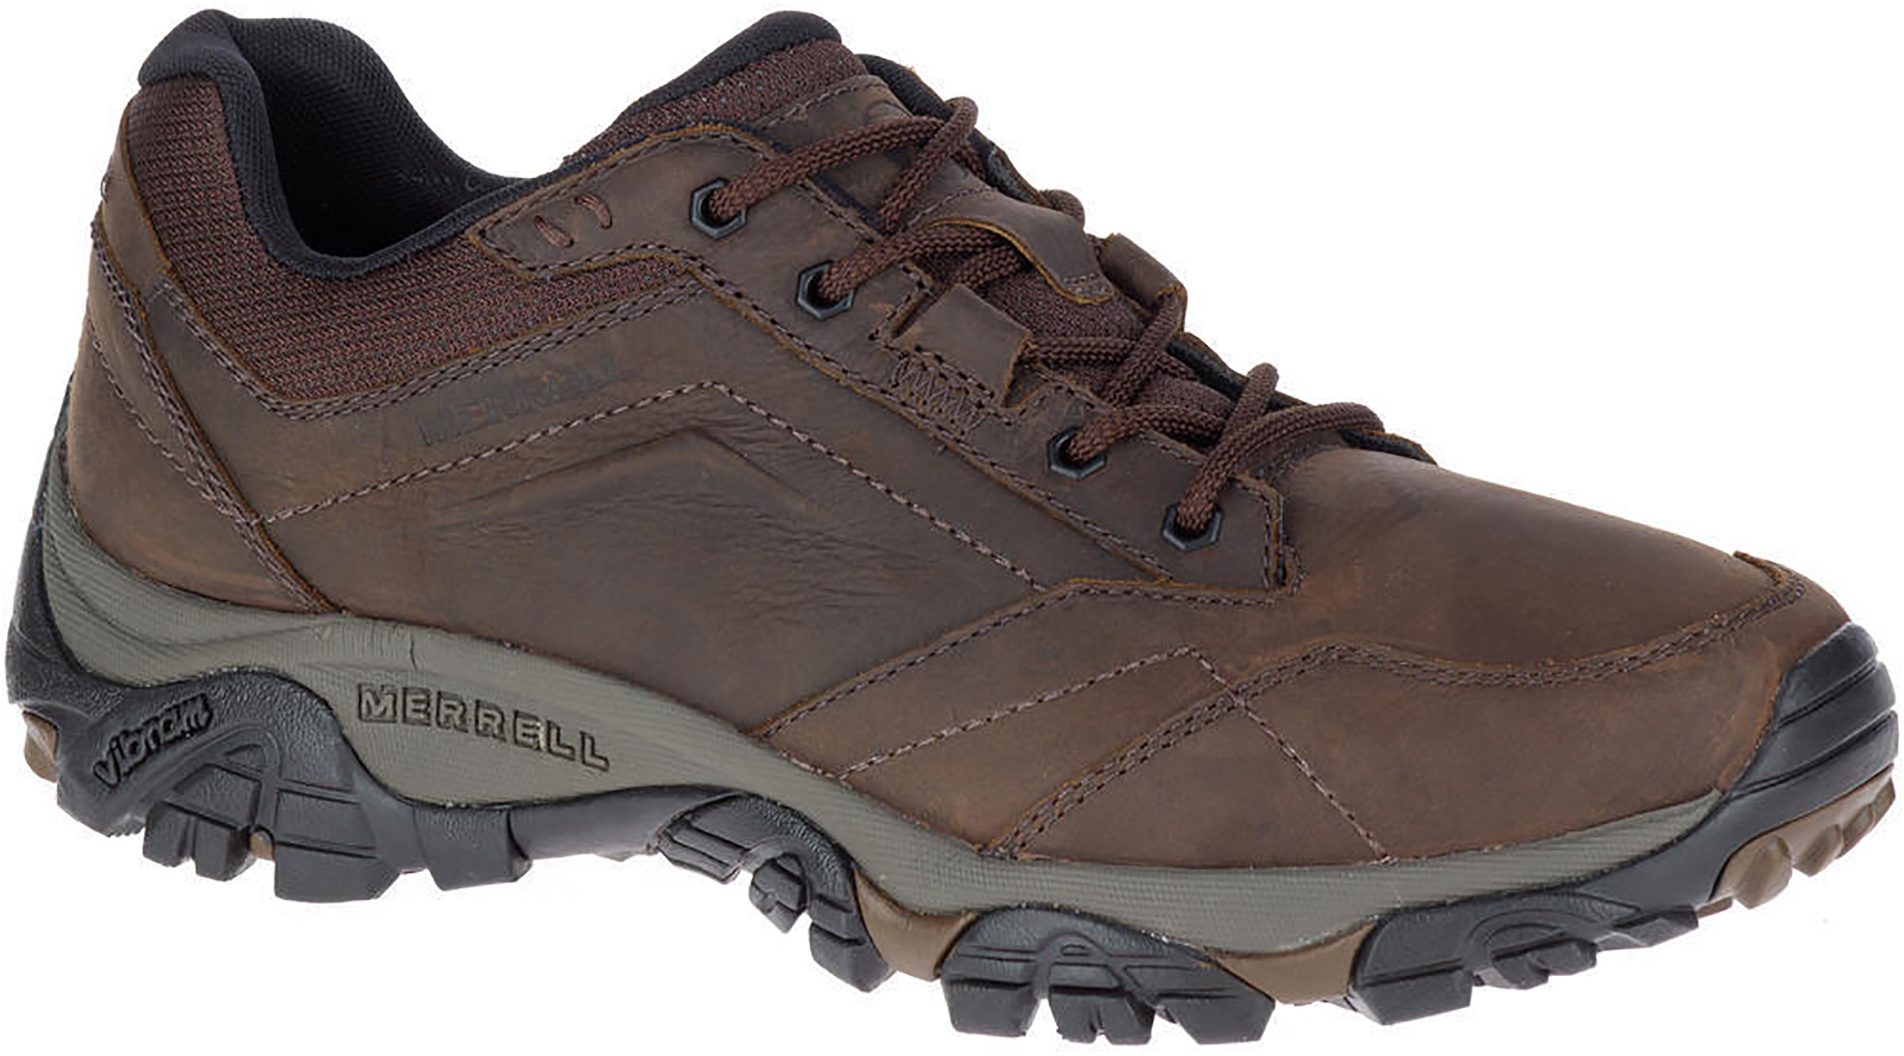 Merrell Moab Adventure Lace Dark Earth J91827 - Outdoor Shoes ...